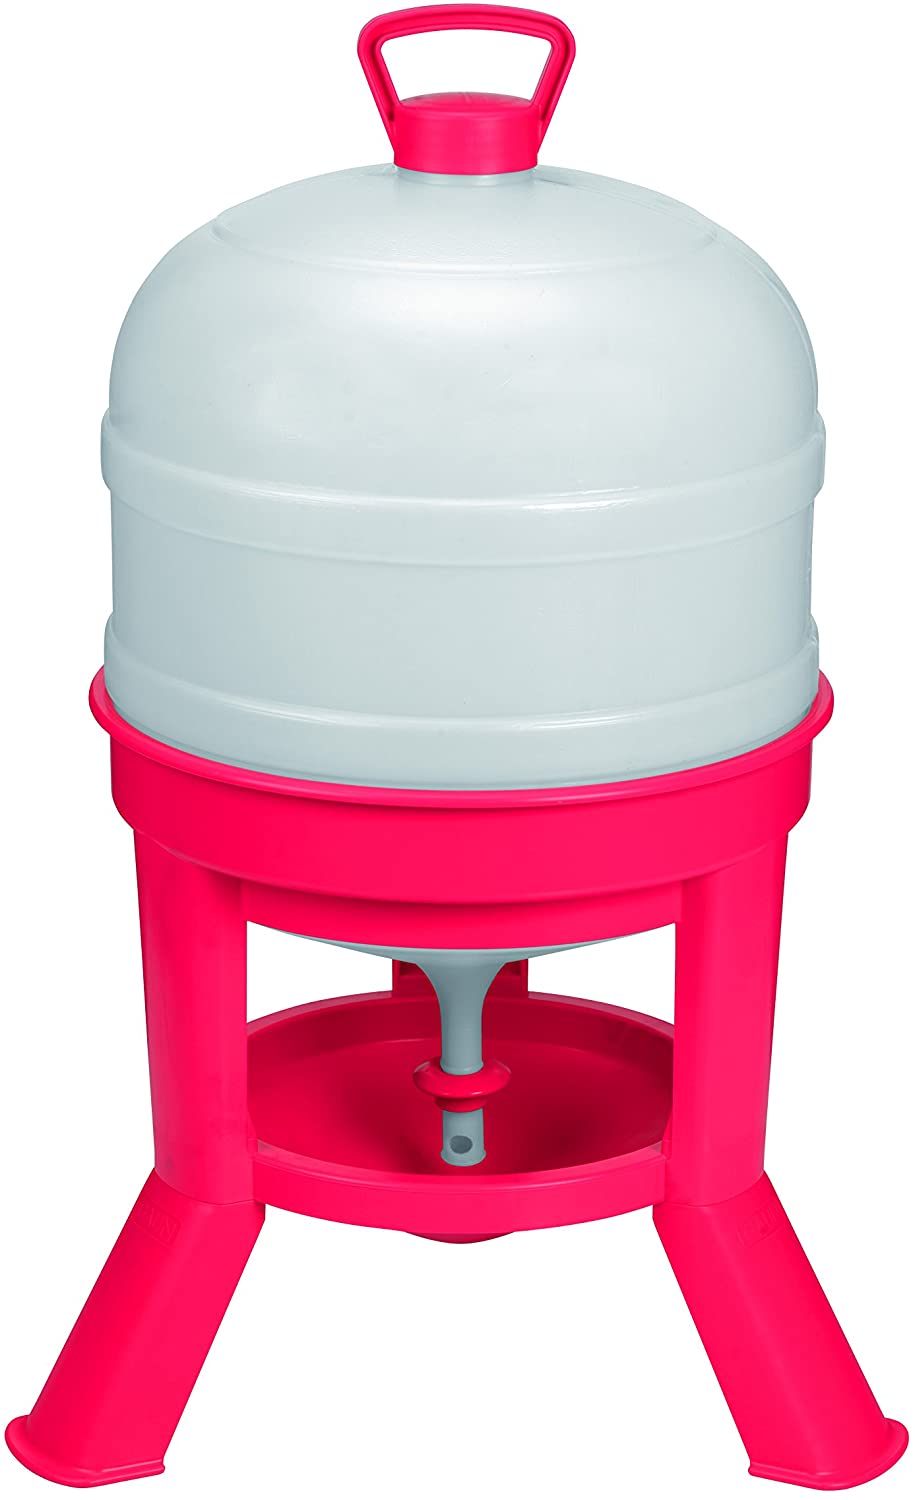 Little Giant Plastic Dome Waterer (8 Gal) Heavy Duty Plastic Gravity Fed Poultry Waterer Container Tank (Red) (Item No. DOMEWTR8)